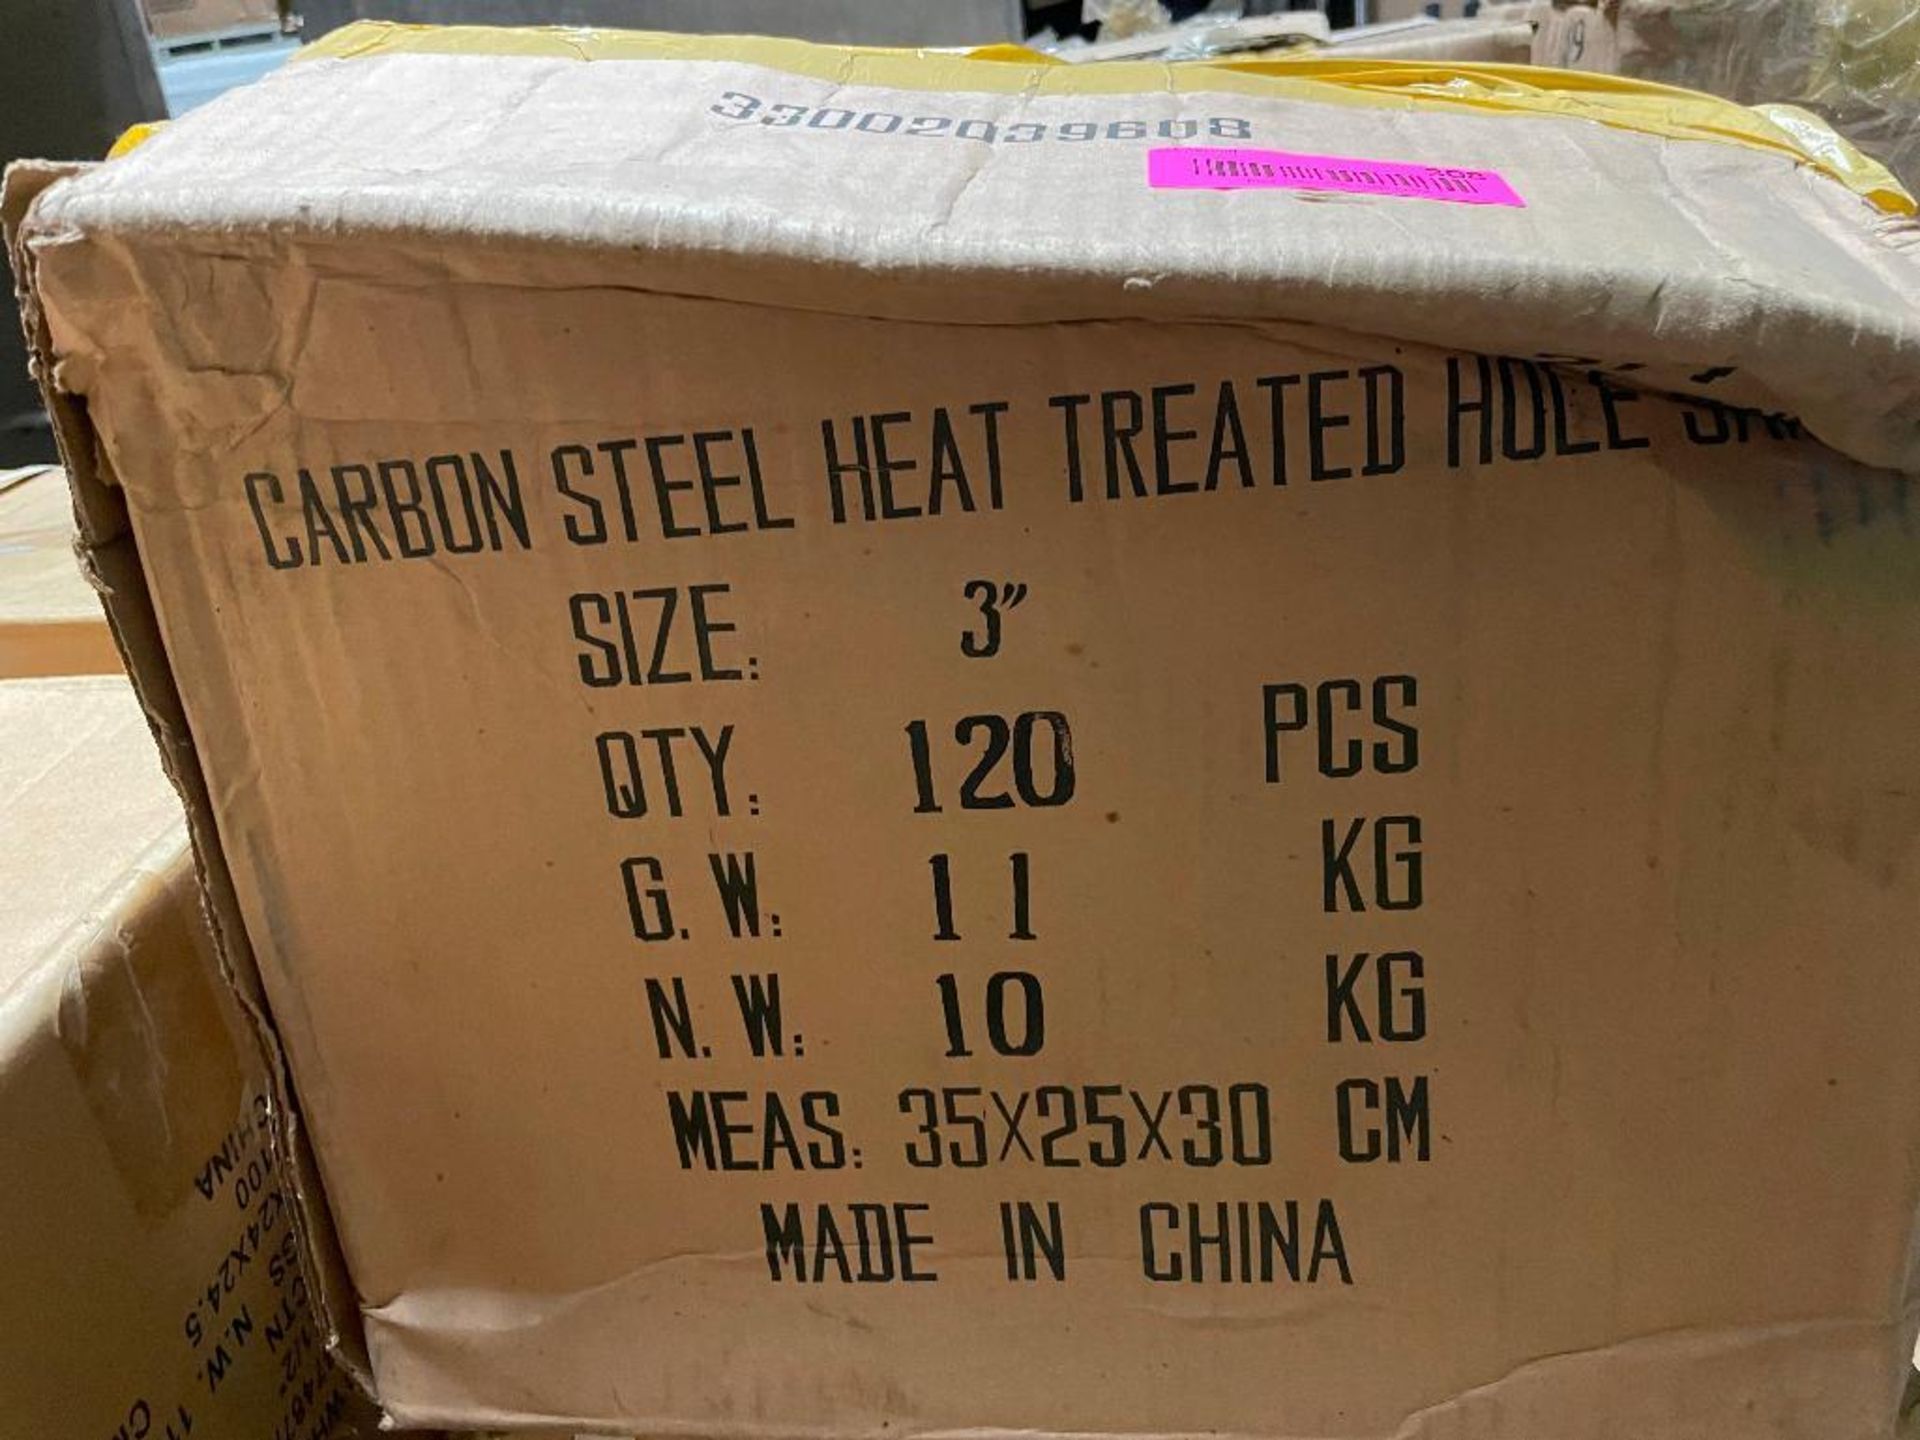 (3) CASES OF 3" CARBON STEEL HEAT TREATED HOLE SAWS. ADDITIONAL INFORMATION 120 PER CASE, 360 IN LOT - Image 2 of 3